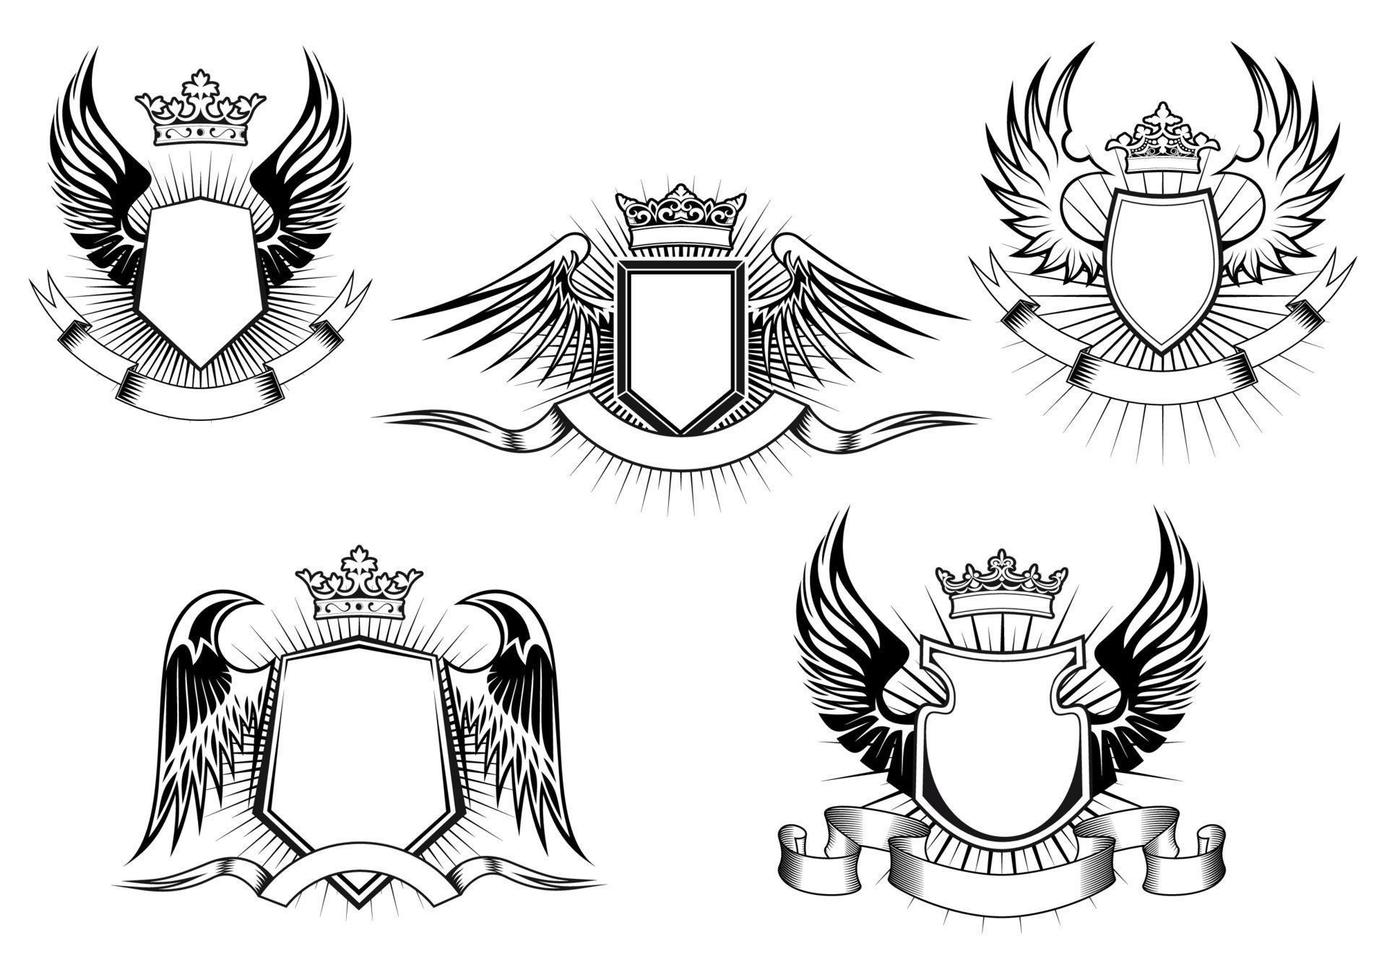 Royal coat of arms templates vector